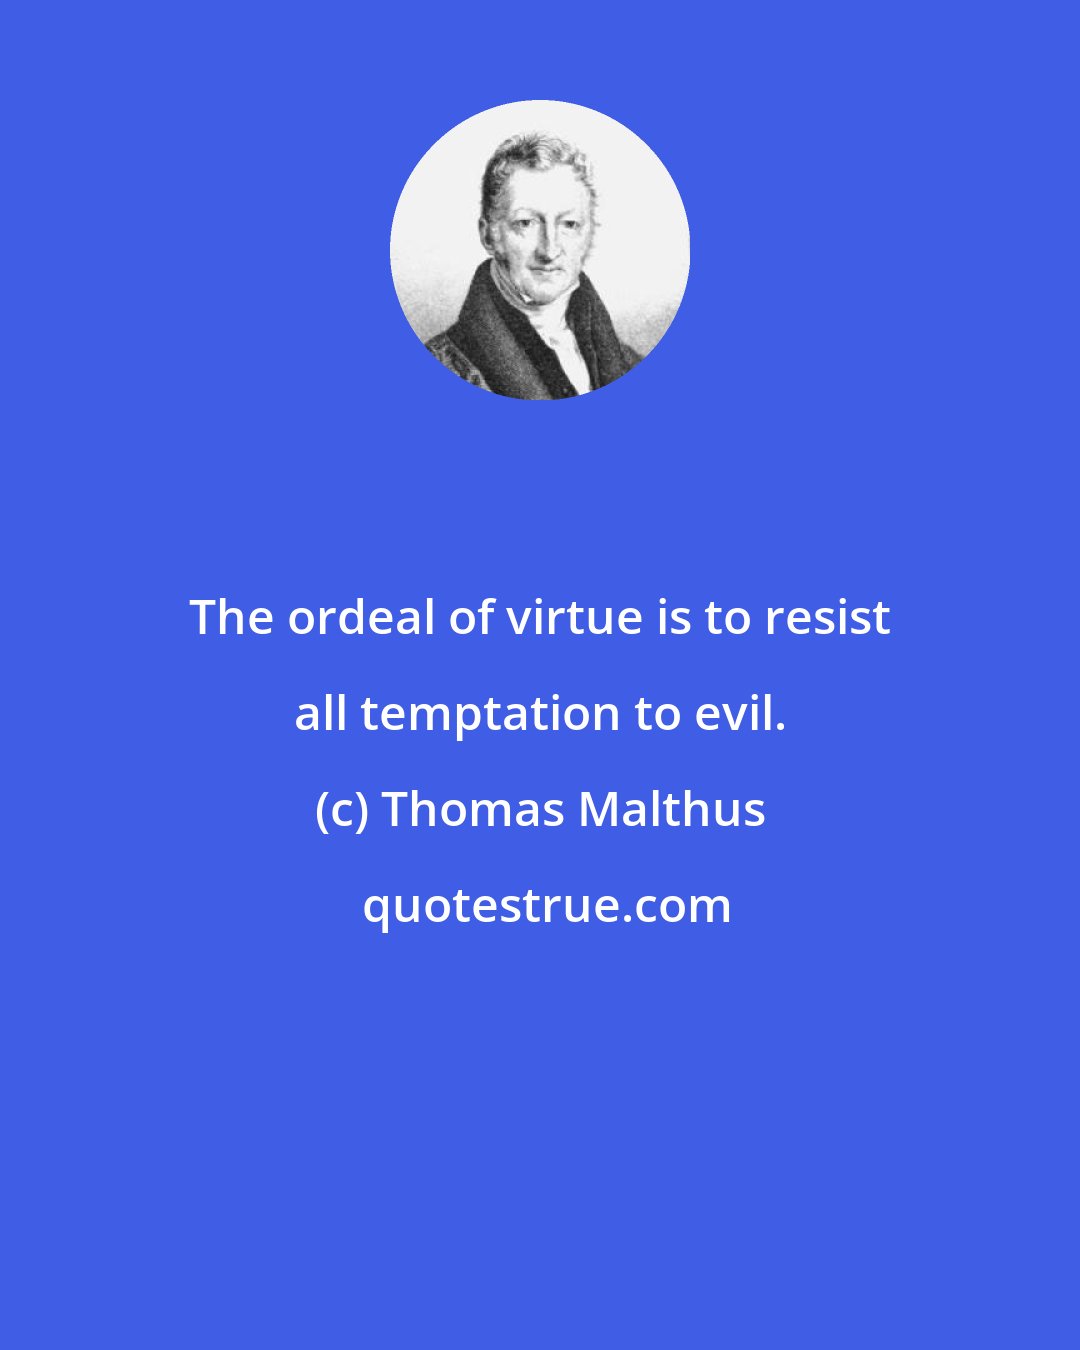 Thomas Malthus: The ordeal of virtue is to resist all temptation to evil.